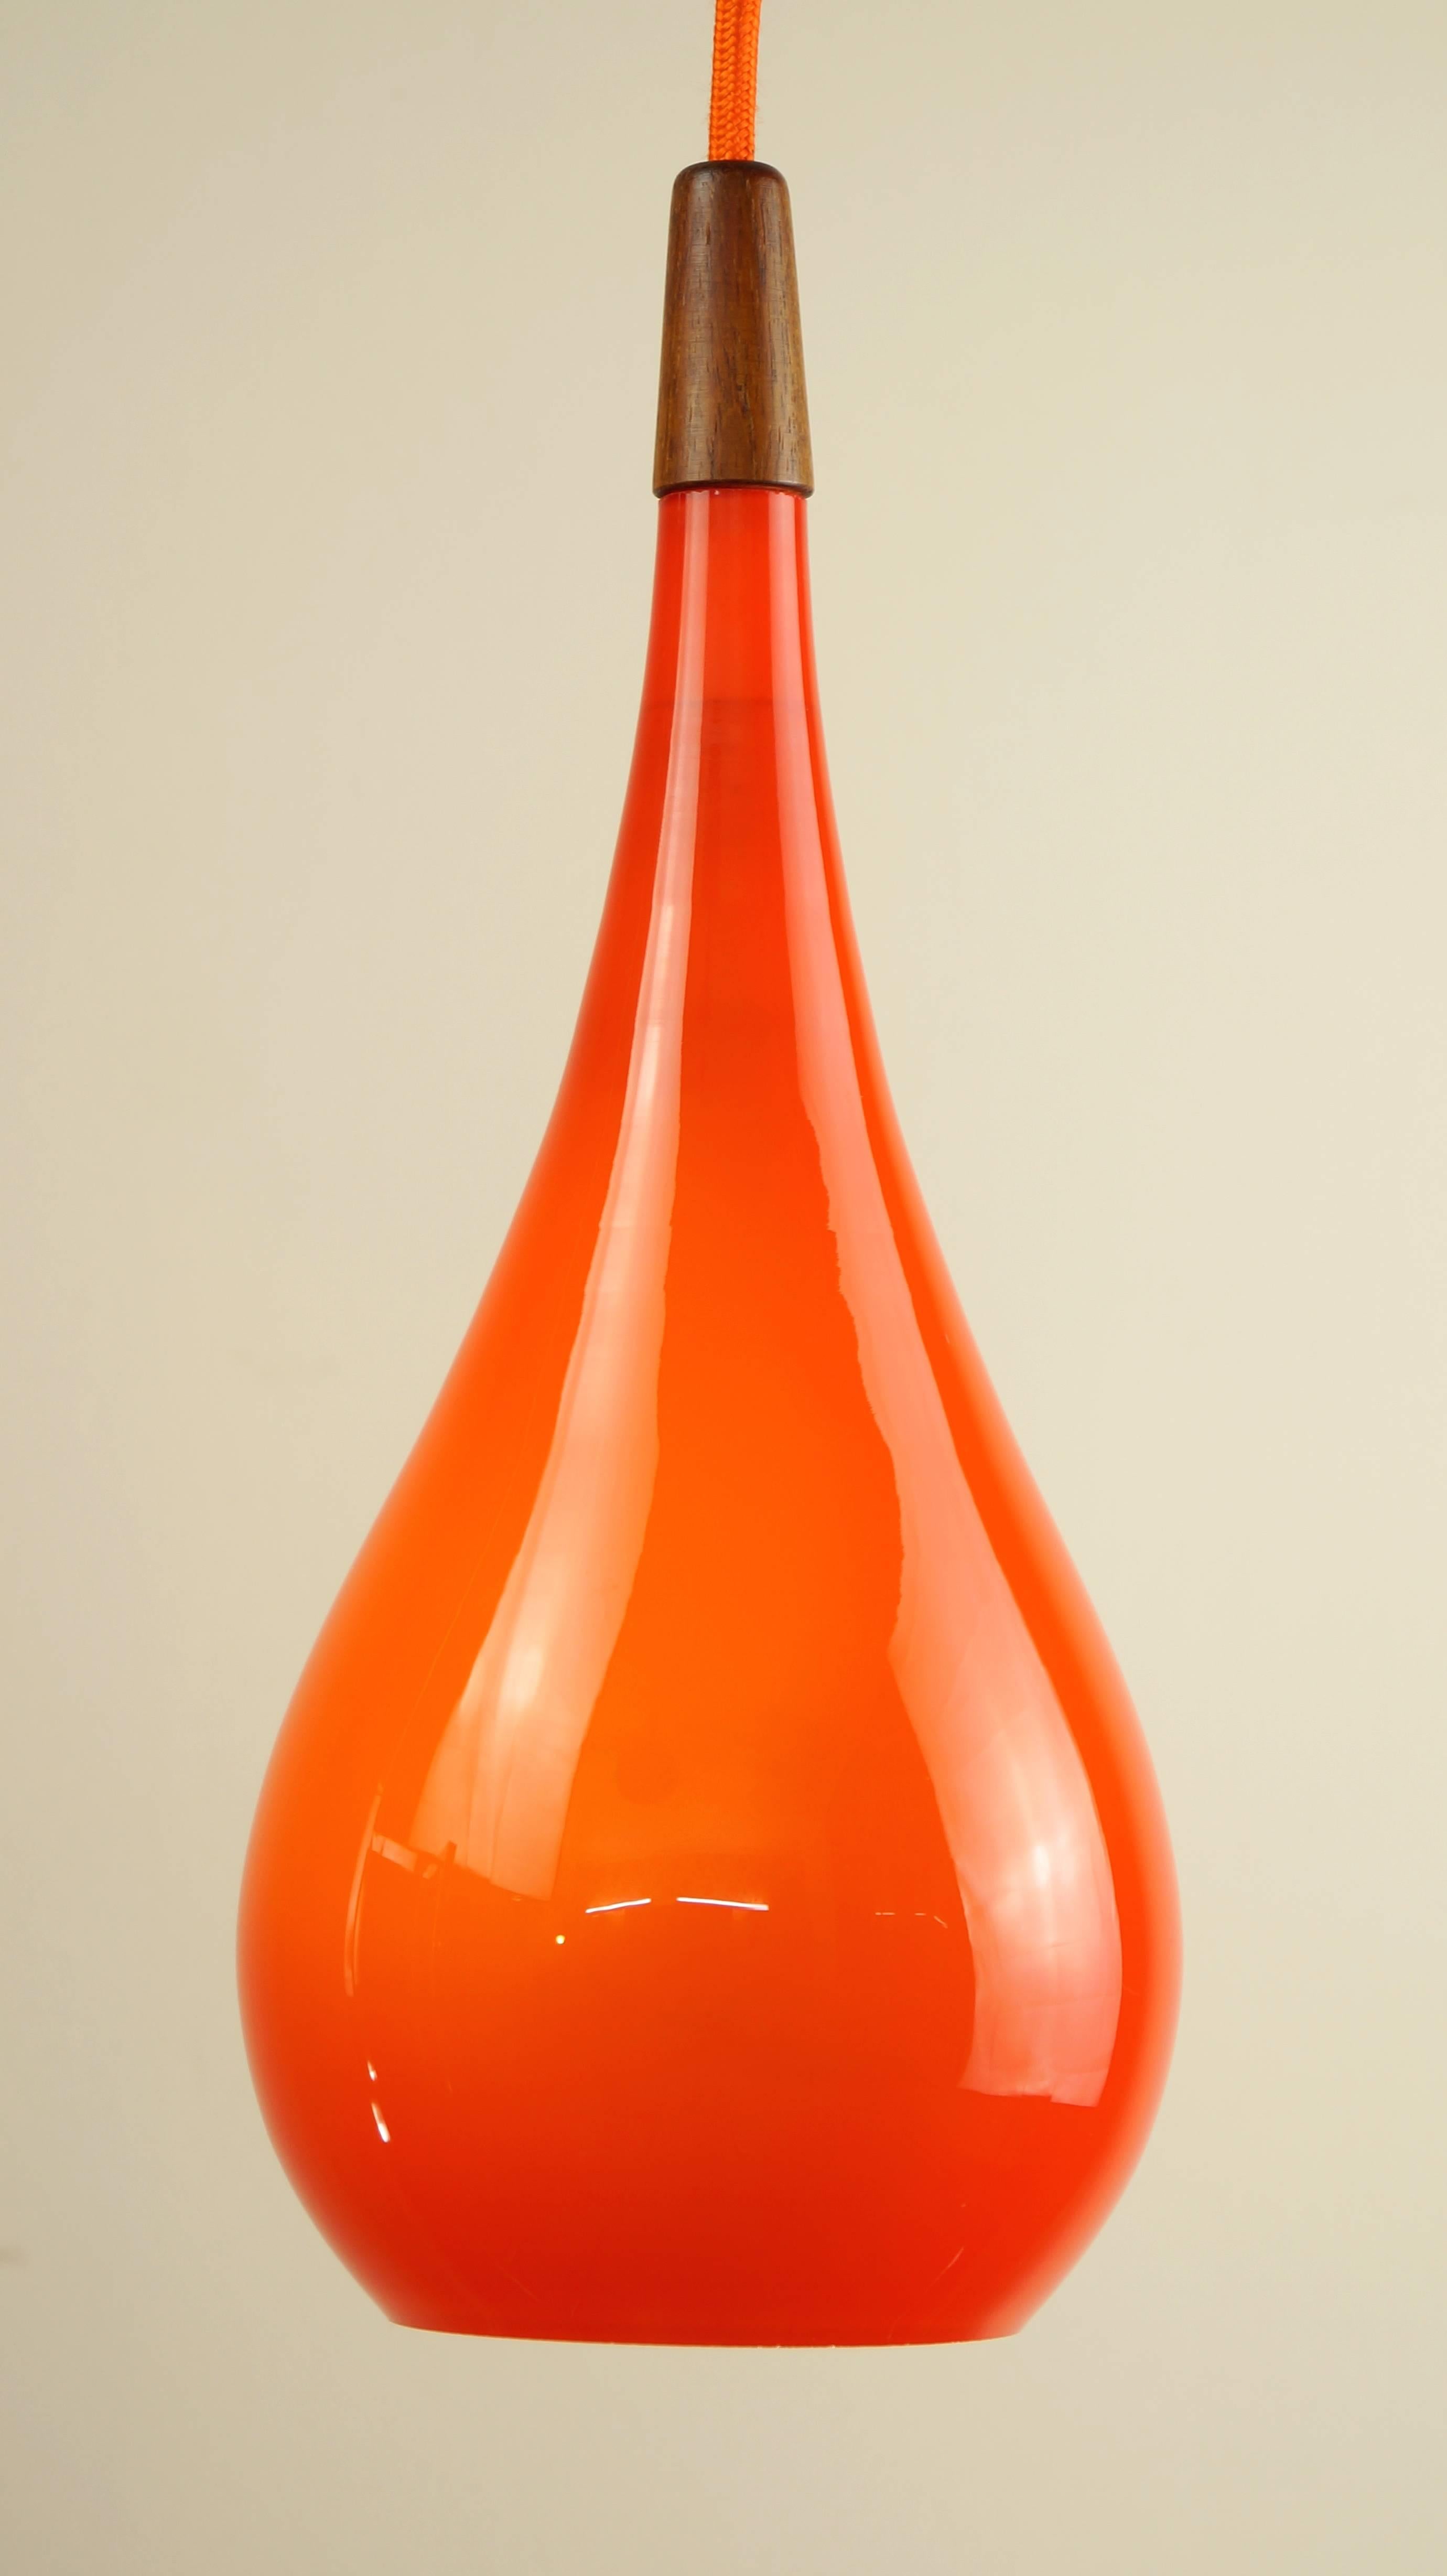 Vintage orange glass and teak pendant light.
Designer: Holmegaard, Denmark,
circa 1960s.

A beautiful handblown 1960s orange glass pendant drop light by Holmegaard, circa 1960s.

Finished with a lovely solid teak final to the top, and